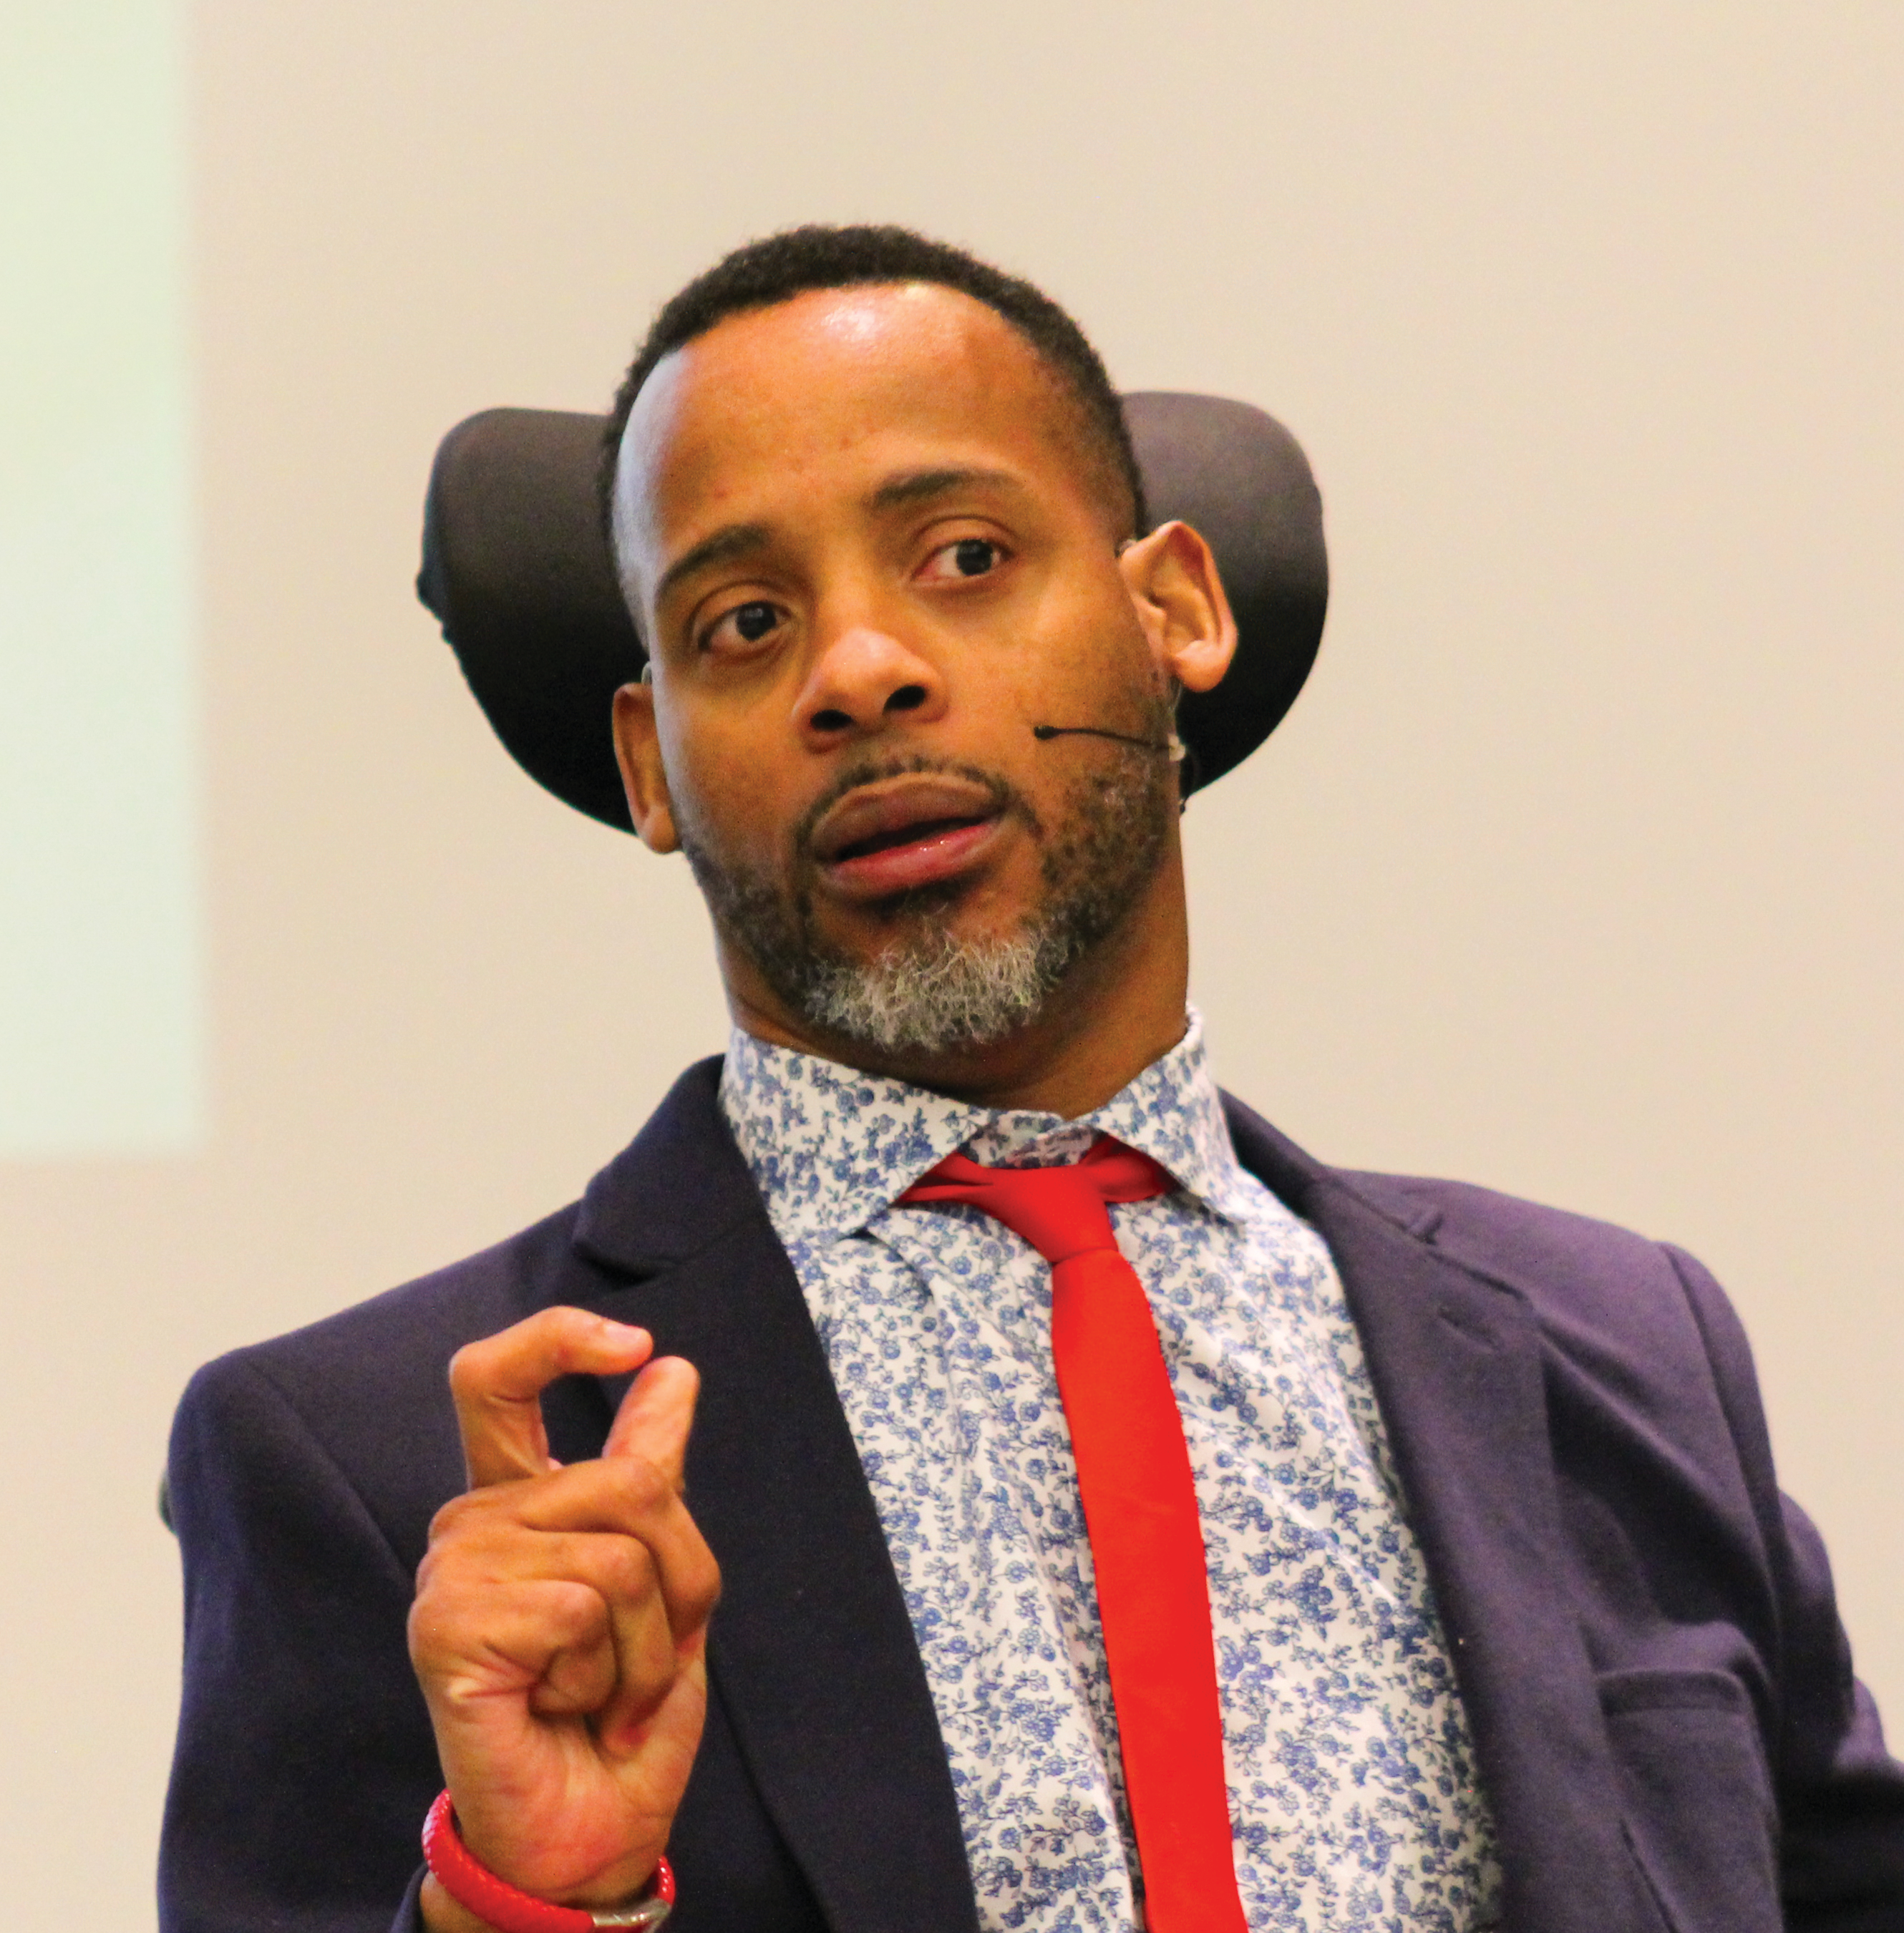 Christopher Coleman speaks on living life to the fullest